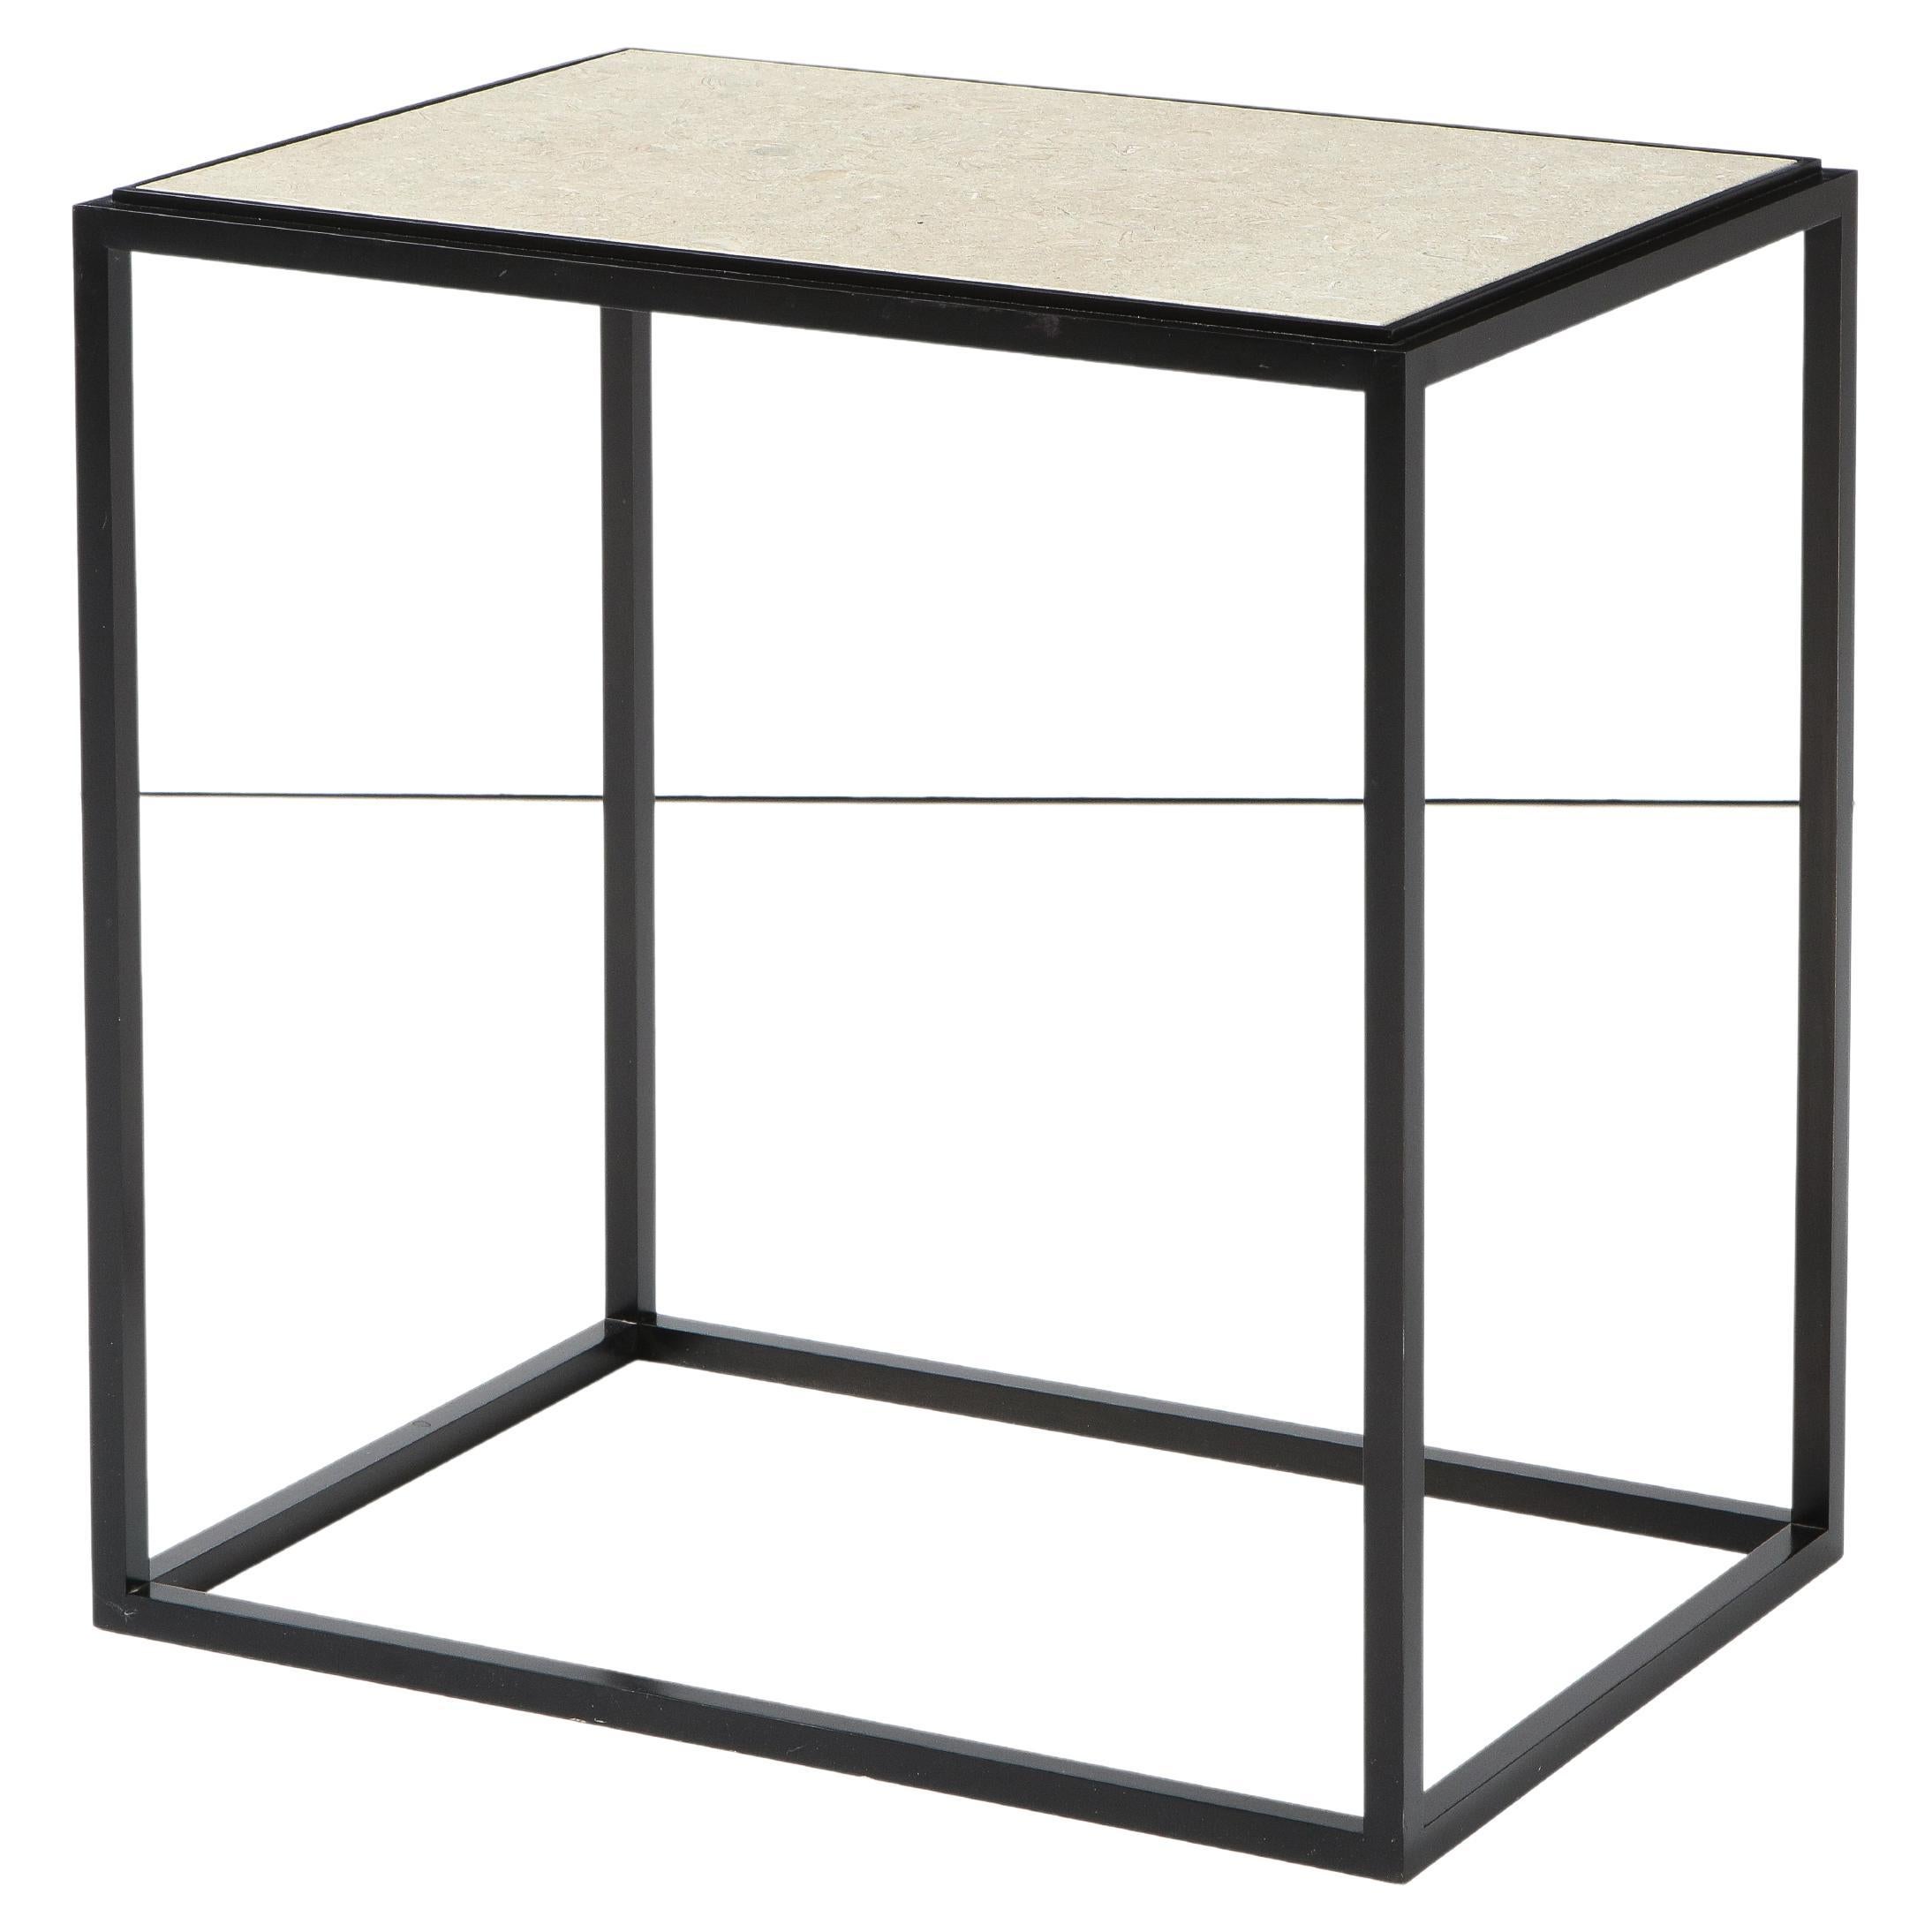 Made to Order Stone Top Side Table/Console with Solid Metal Base